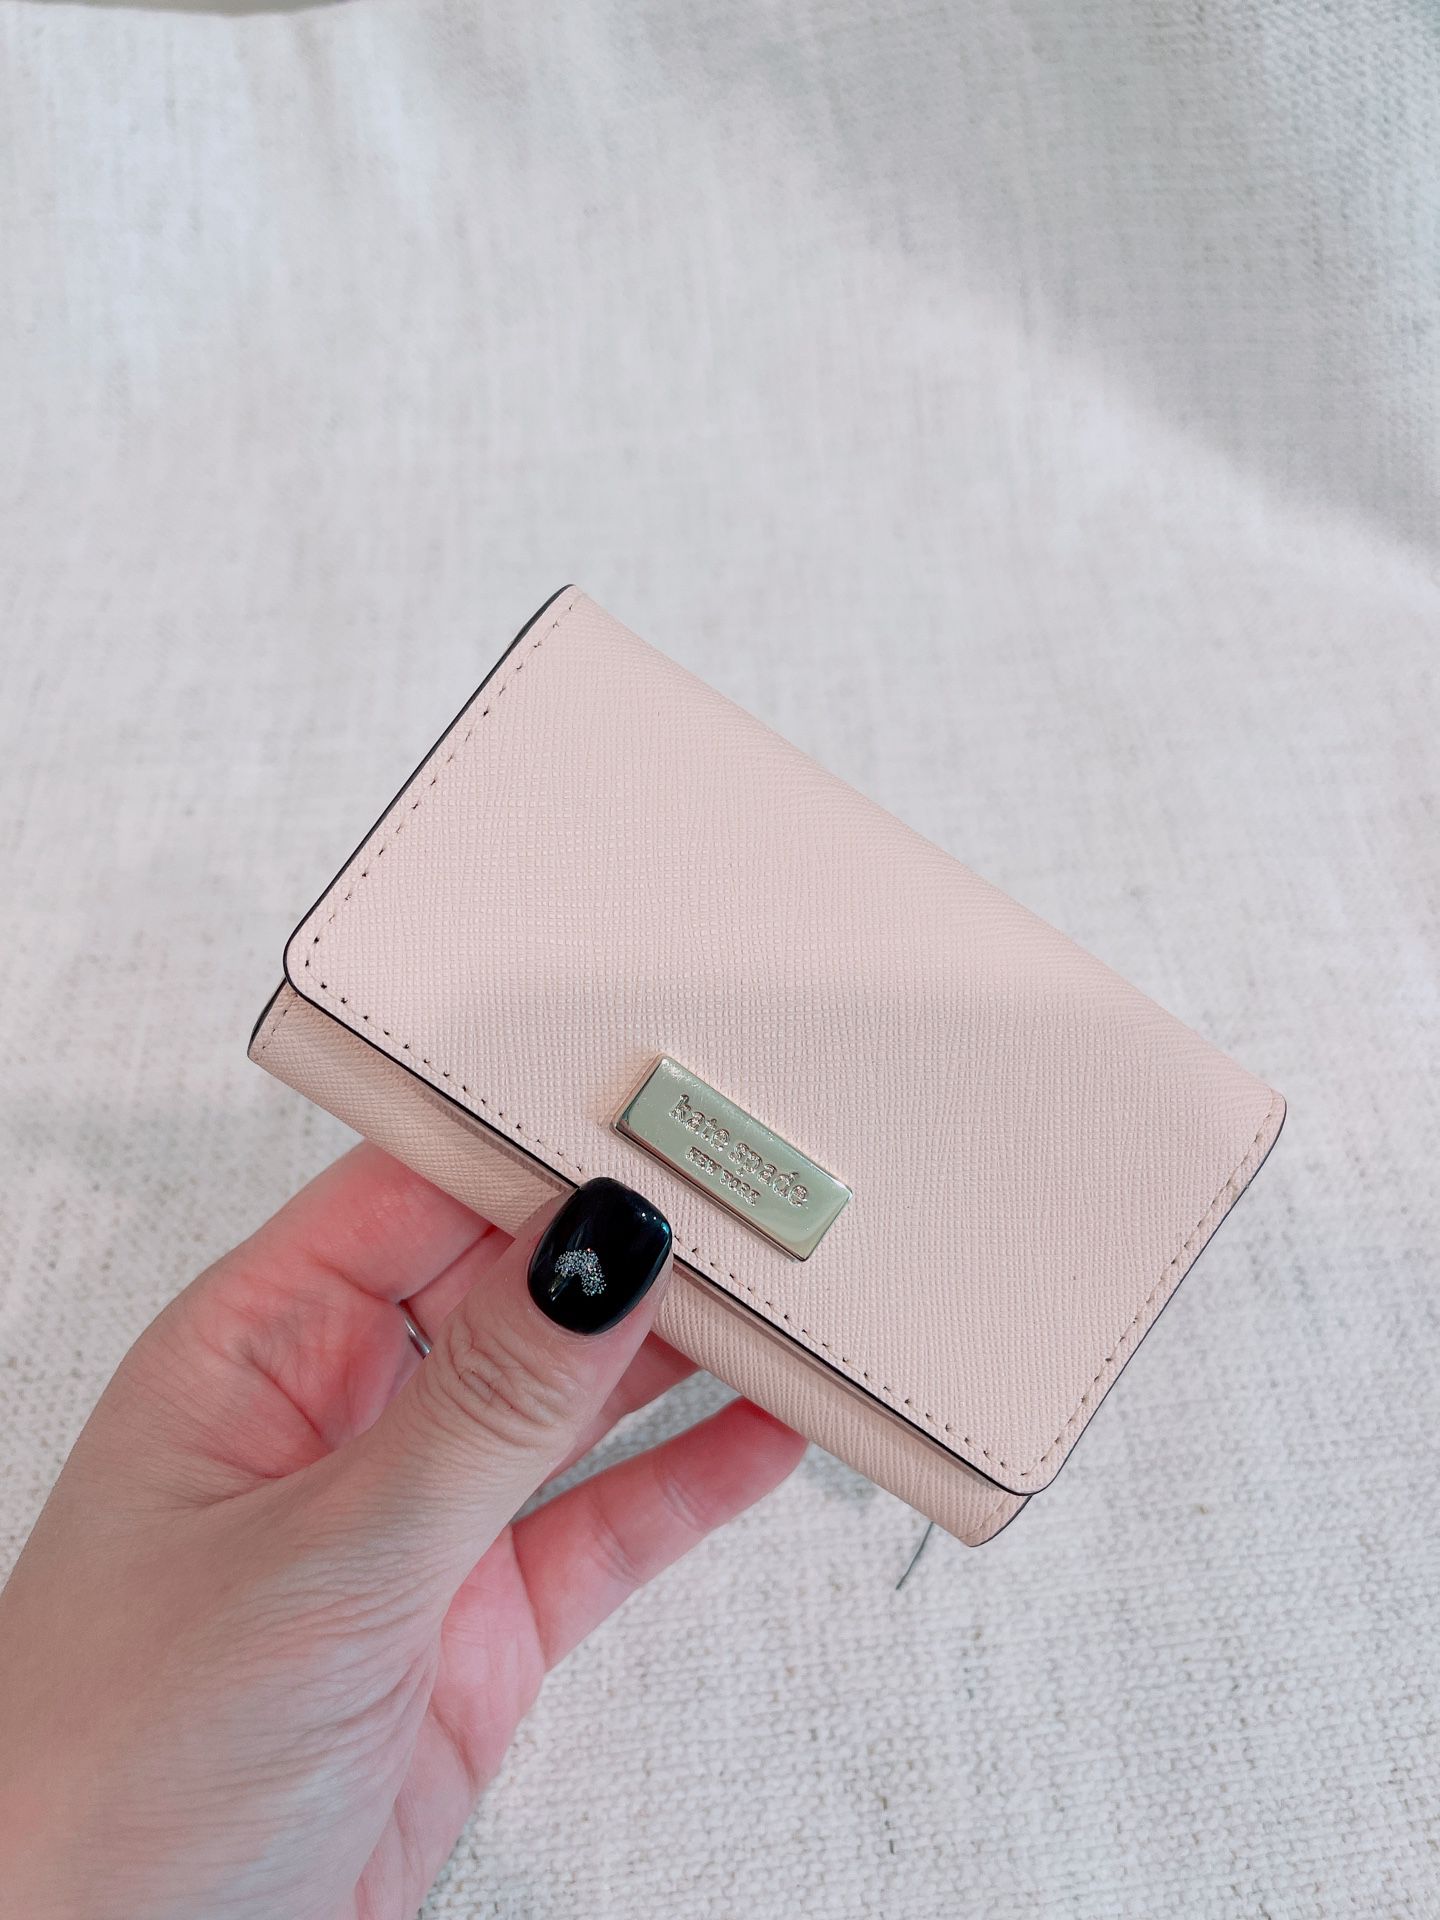 Kate Spade Saffiano Leather Key Case/key holder/ NWT for Sale in Cumming,  GA - OfferUp